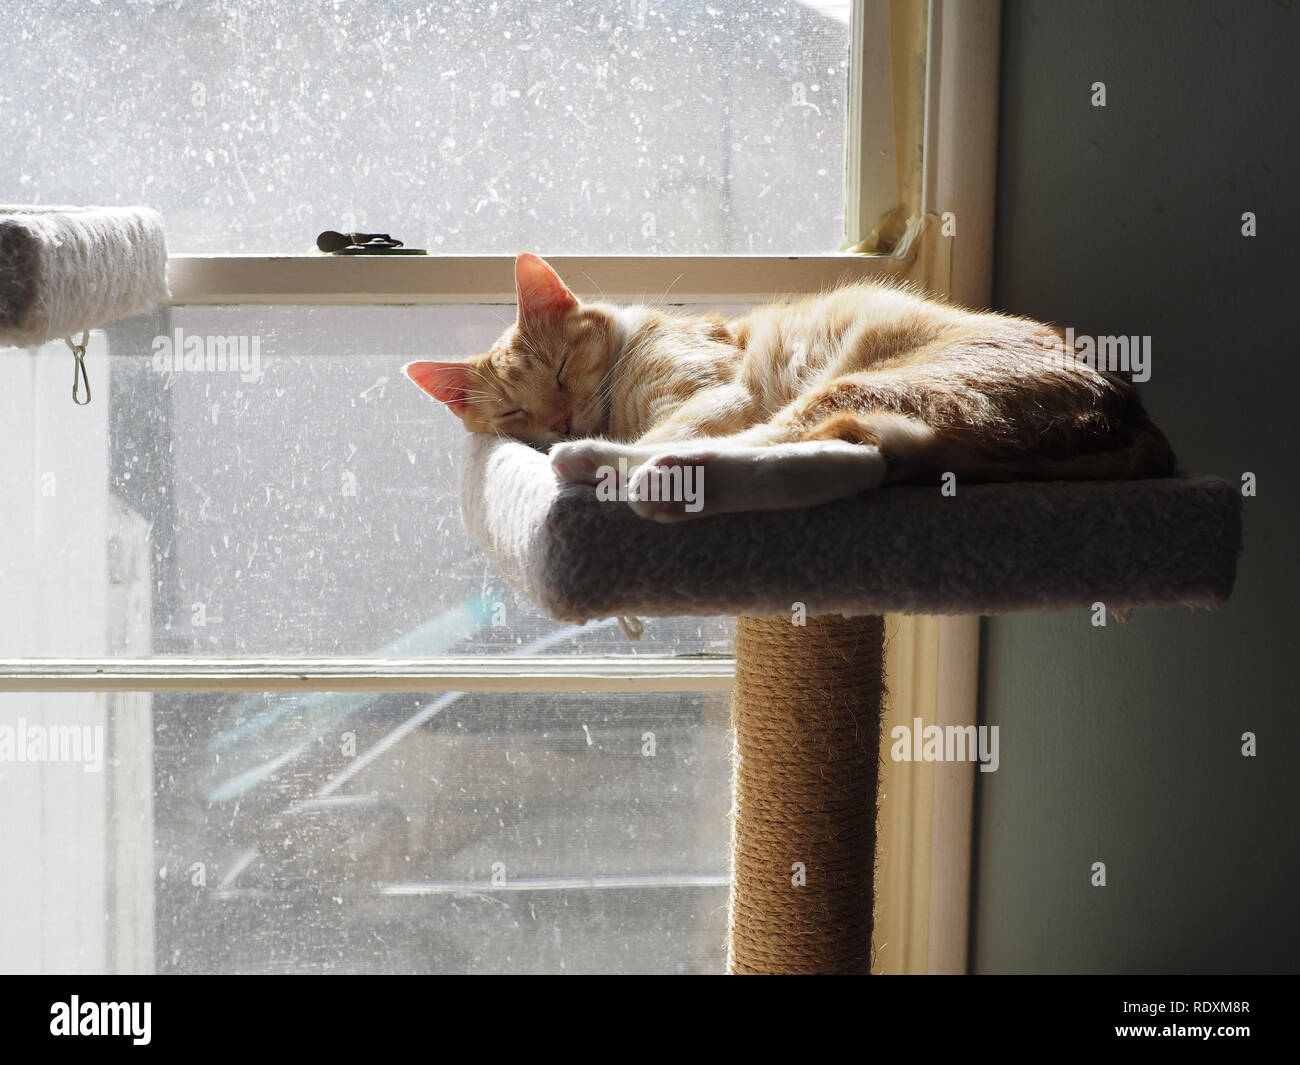 Mika the orange tabby sunbathing and taking a nap on his cat tree Stock Photo